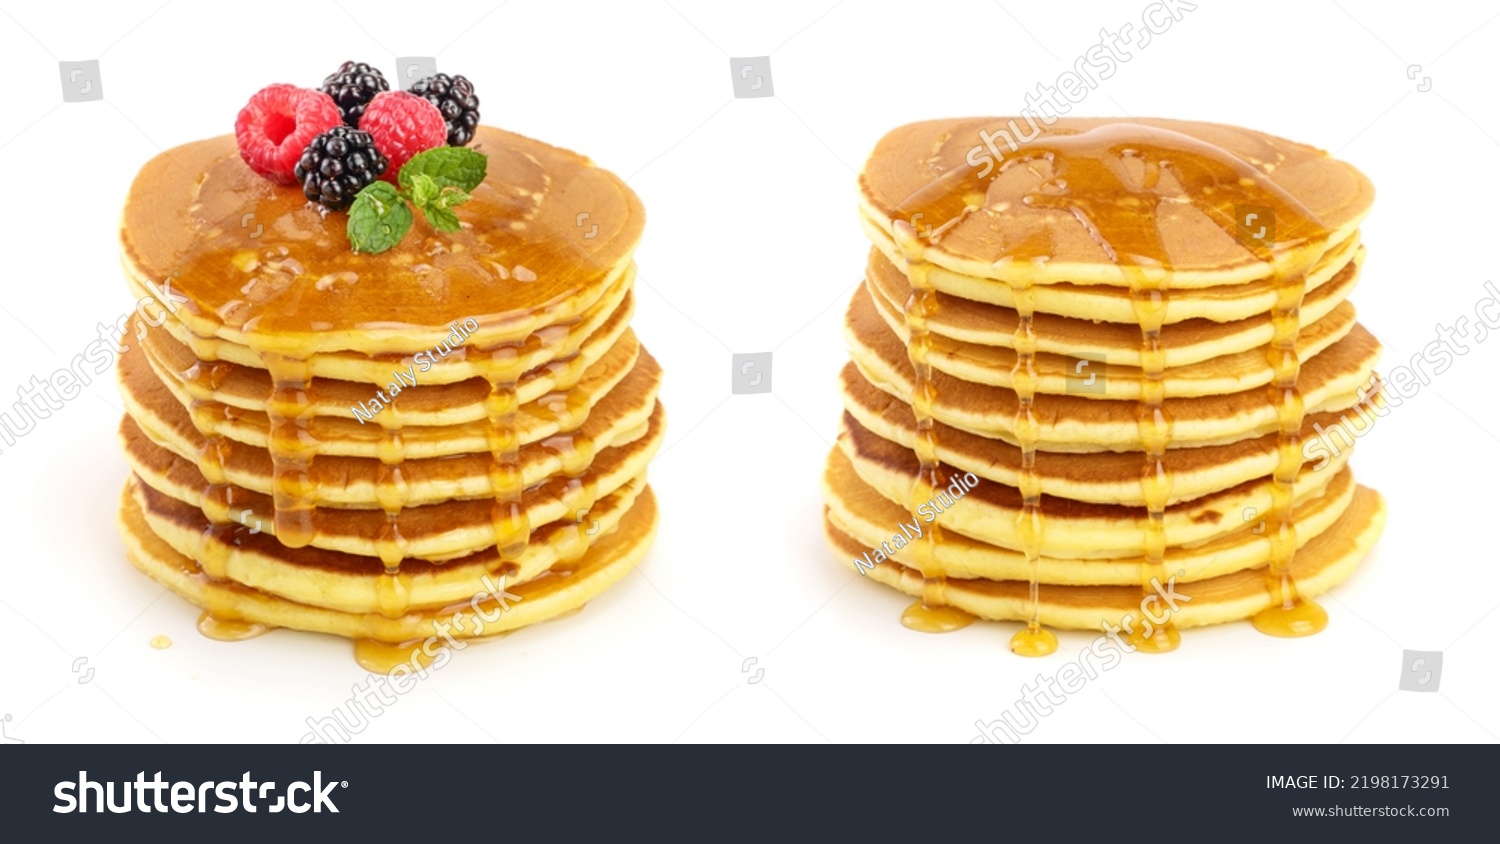 Pancakes stack with different berries and honey isolated on white background #2198173291